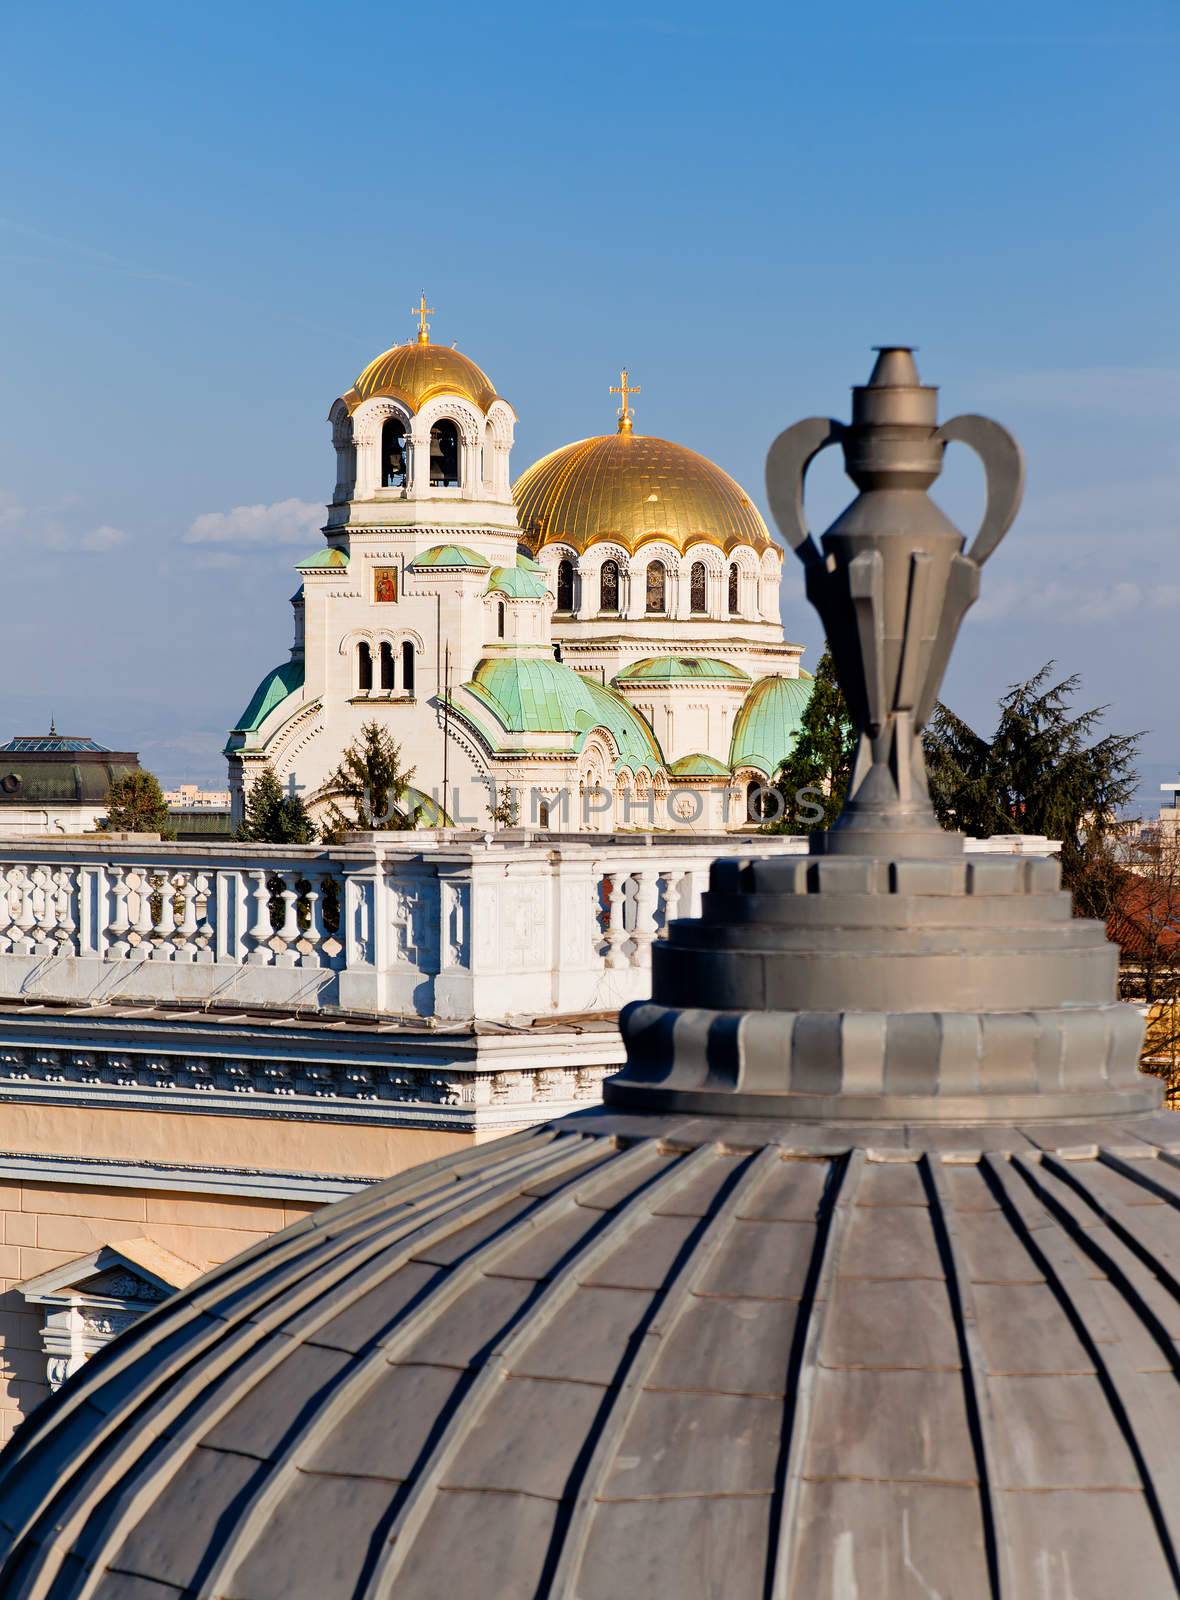 A view of golden domes st. Aleksander Nevski cathedral in Sofia, Bulgaria through a detail on a roof of a building. Vertical image.